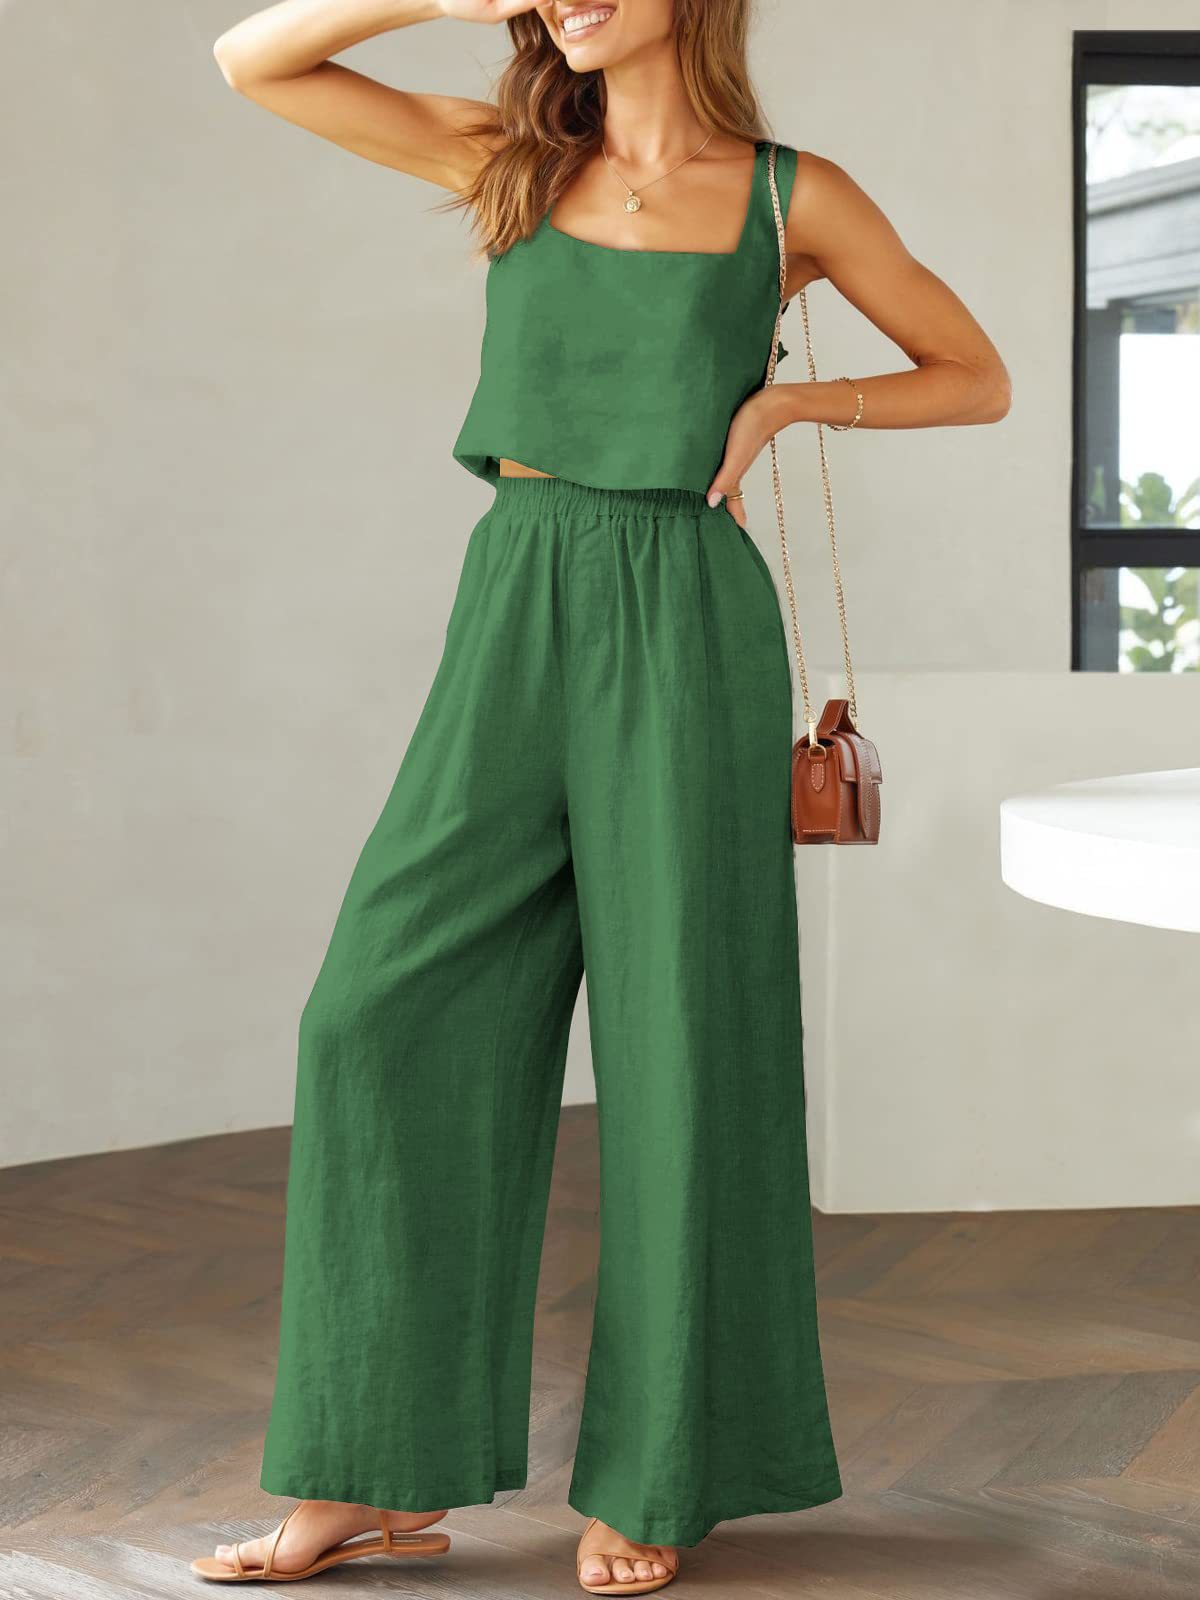 NTG Fad SUIT Green / S Cotton linen sleeveless camisole wide-leg trousers casual suit